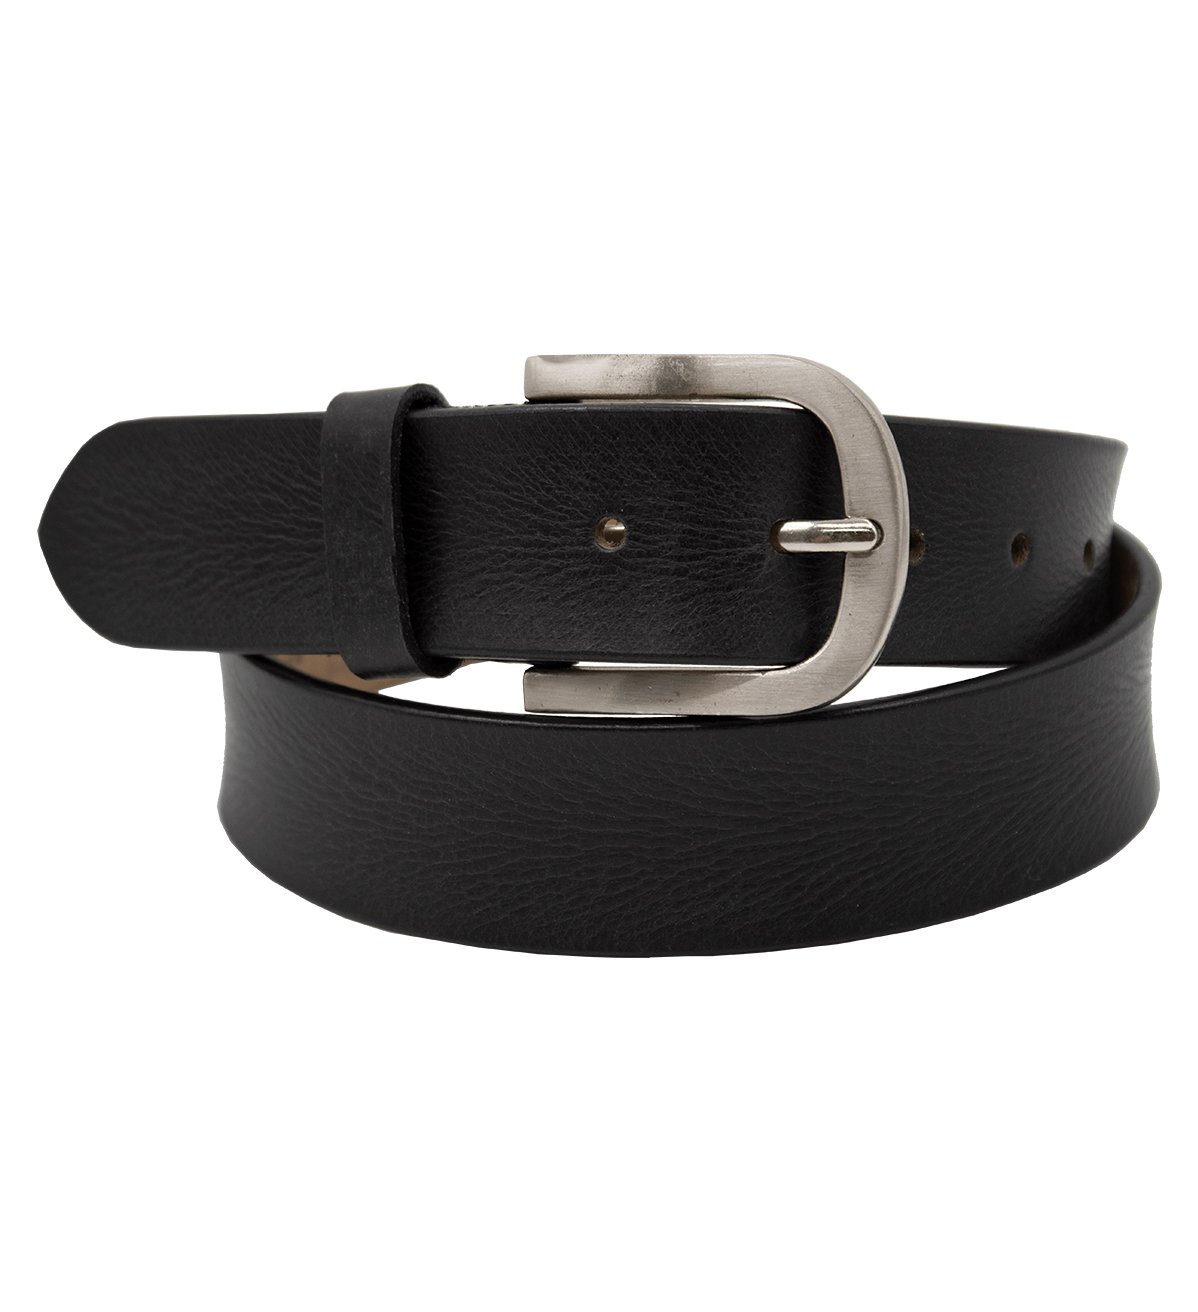 Men's Casual Leather Belt with Silver Steel Buckle - #BT-1601